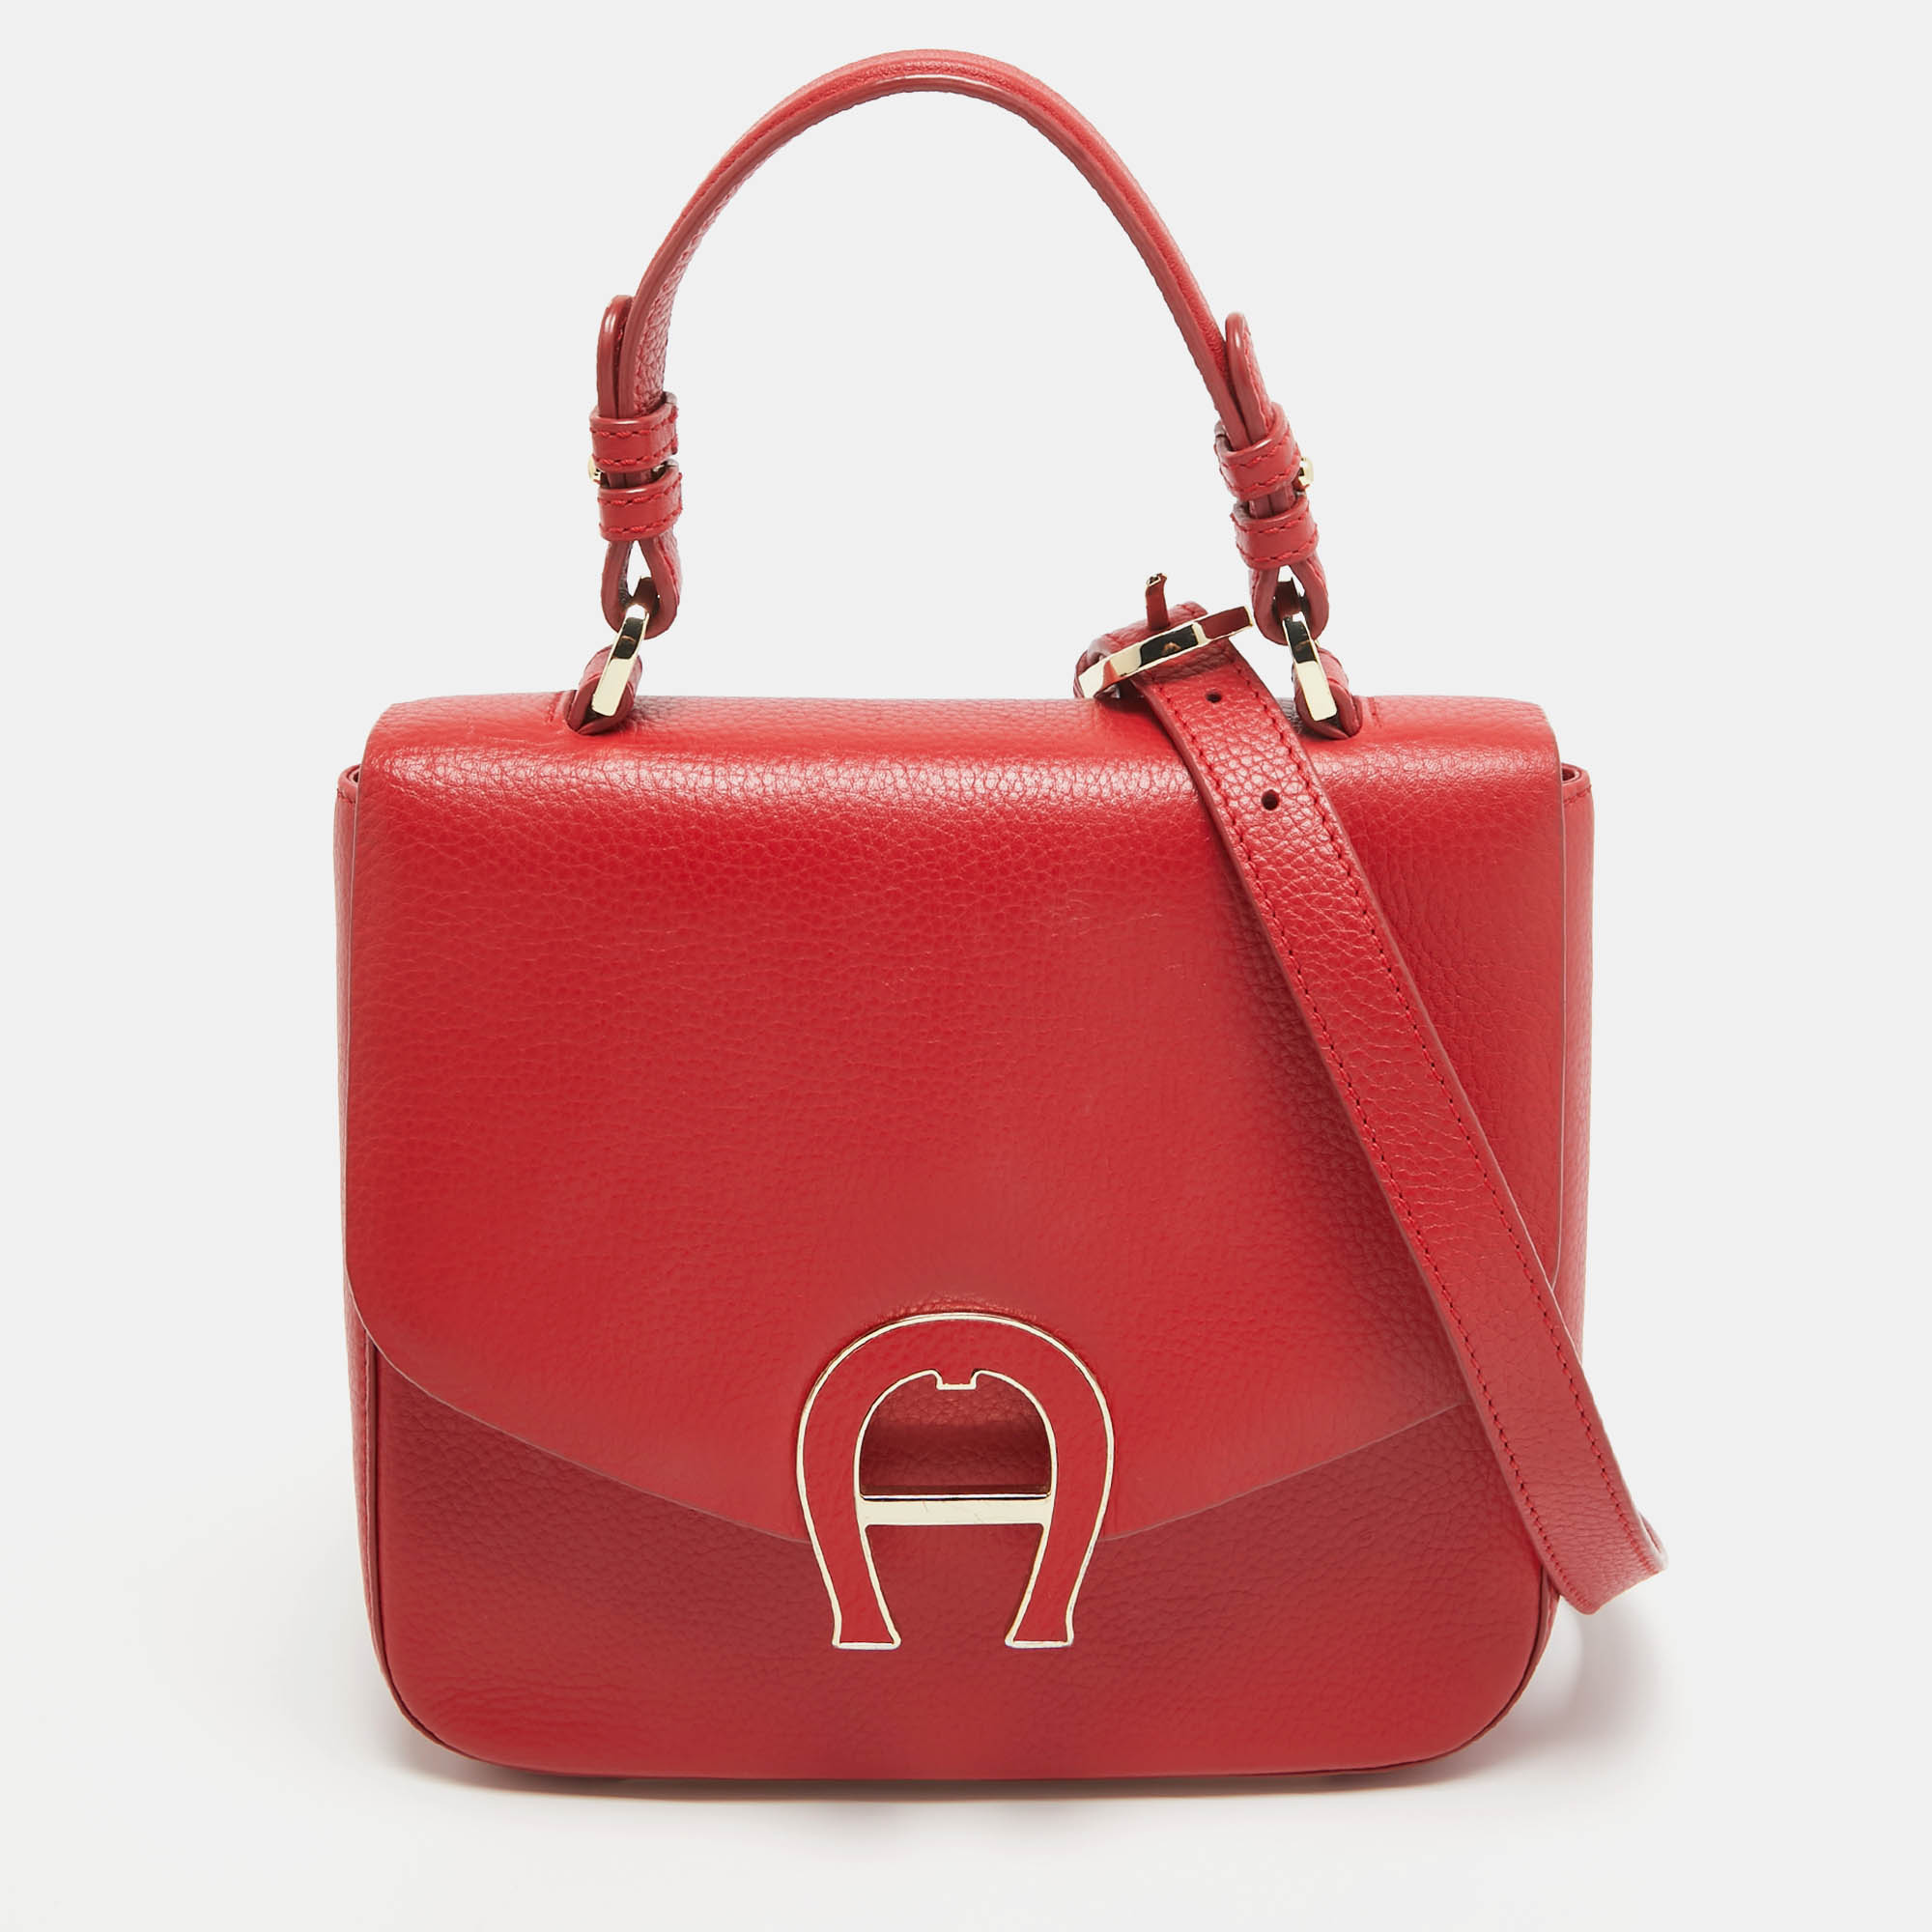 Aigner red leather logo flap top handle bag